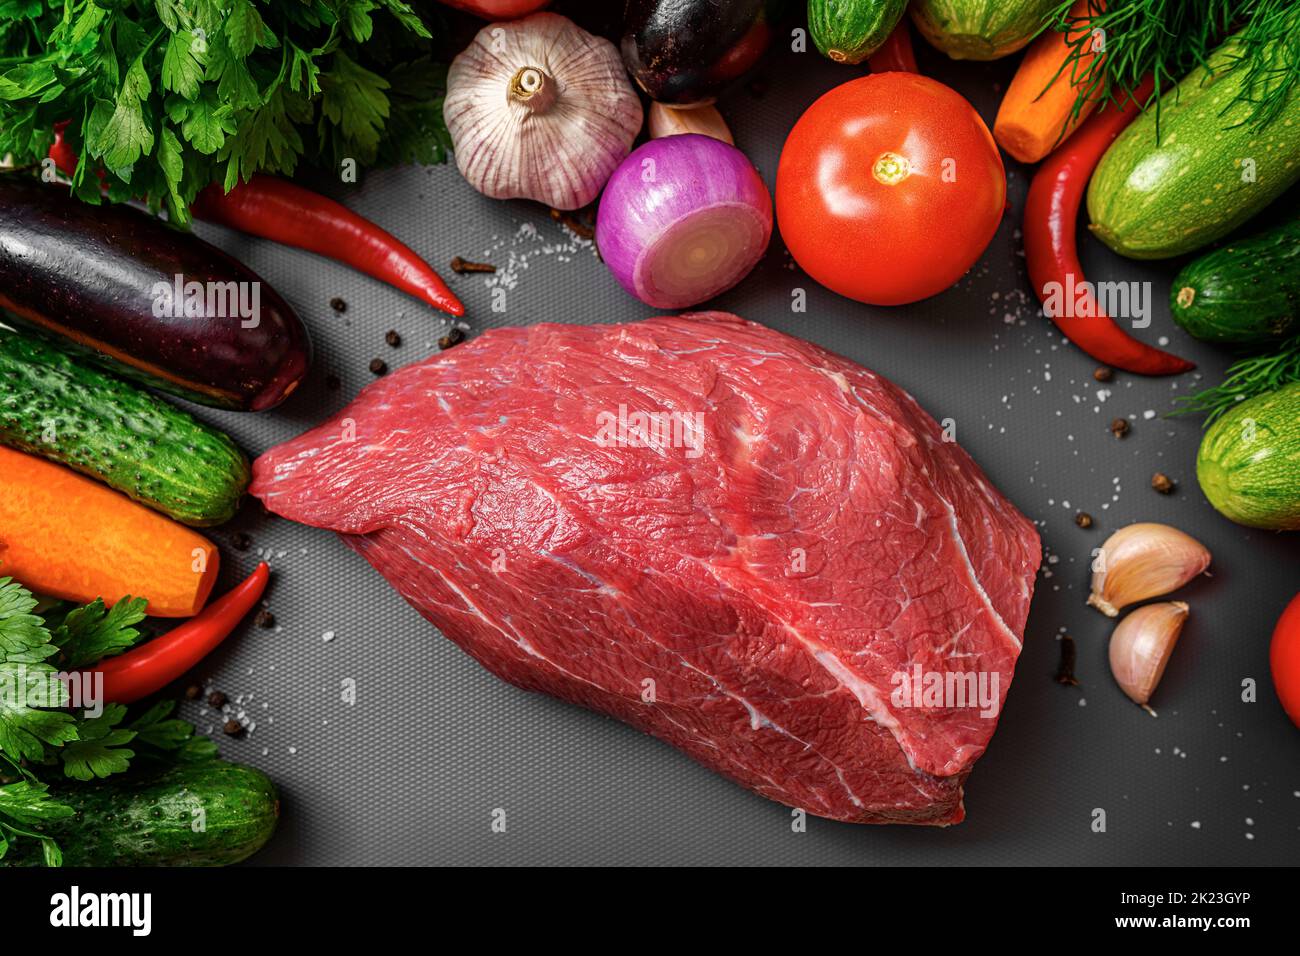 Red meat and vegetables on a cutting board. Stock Photo